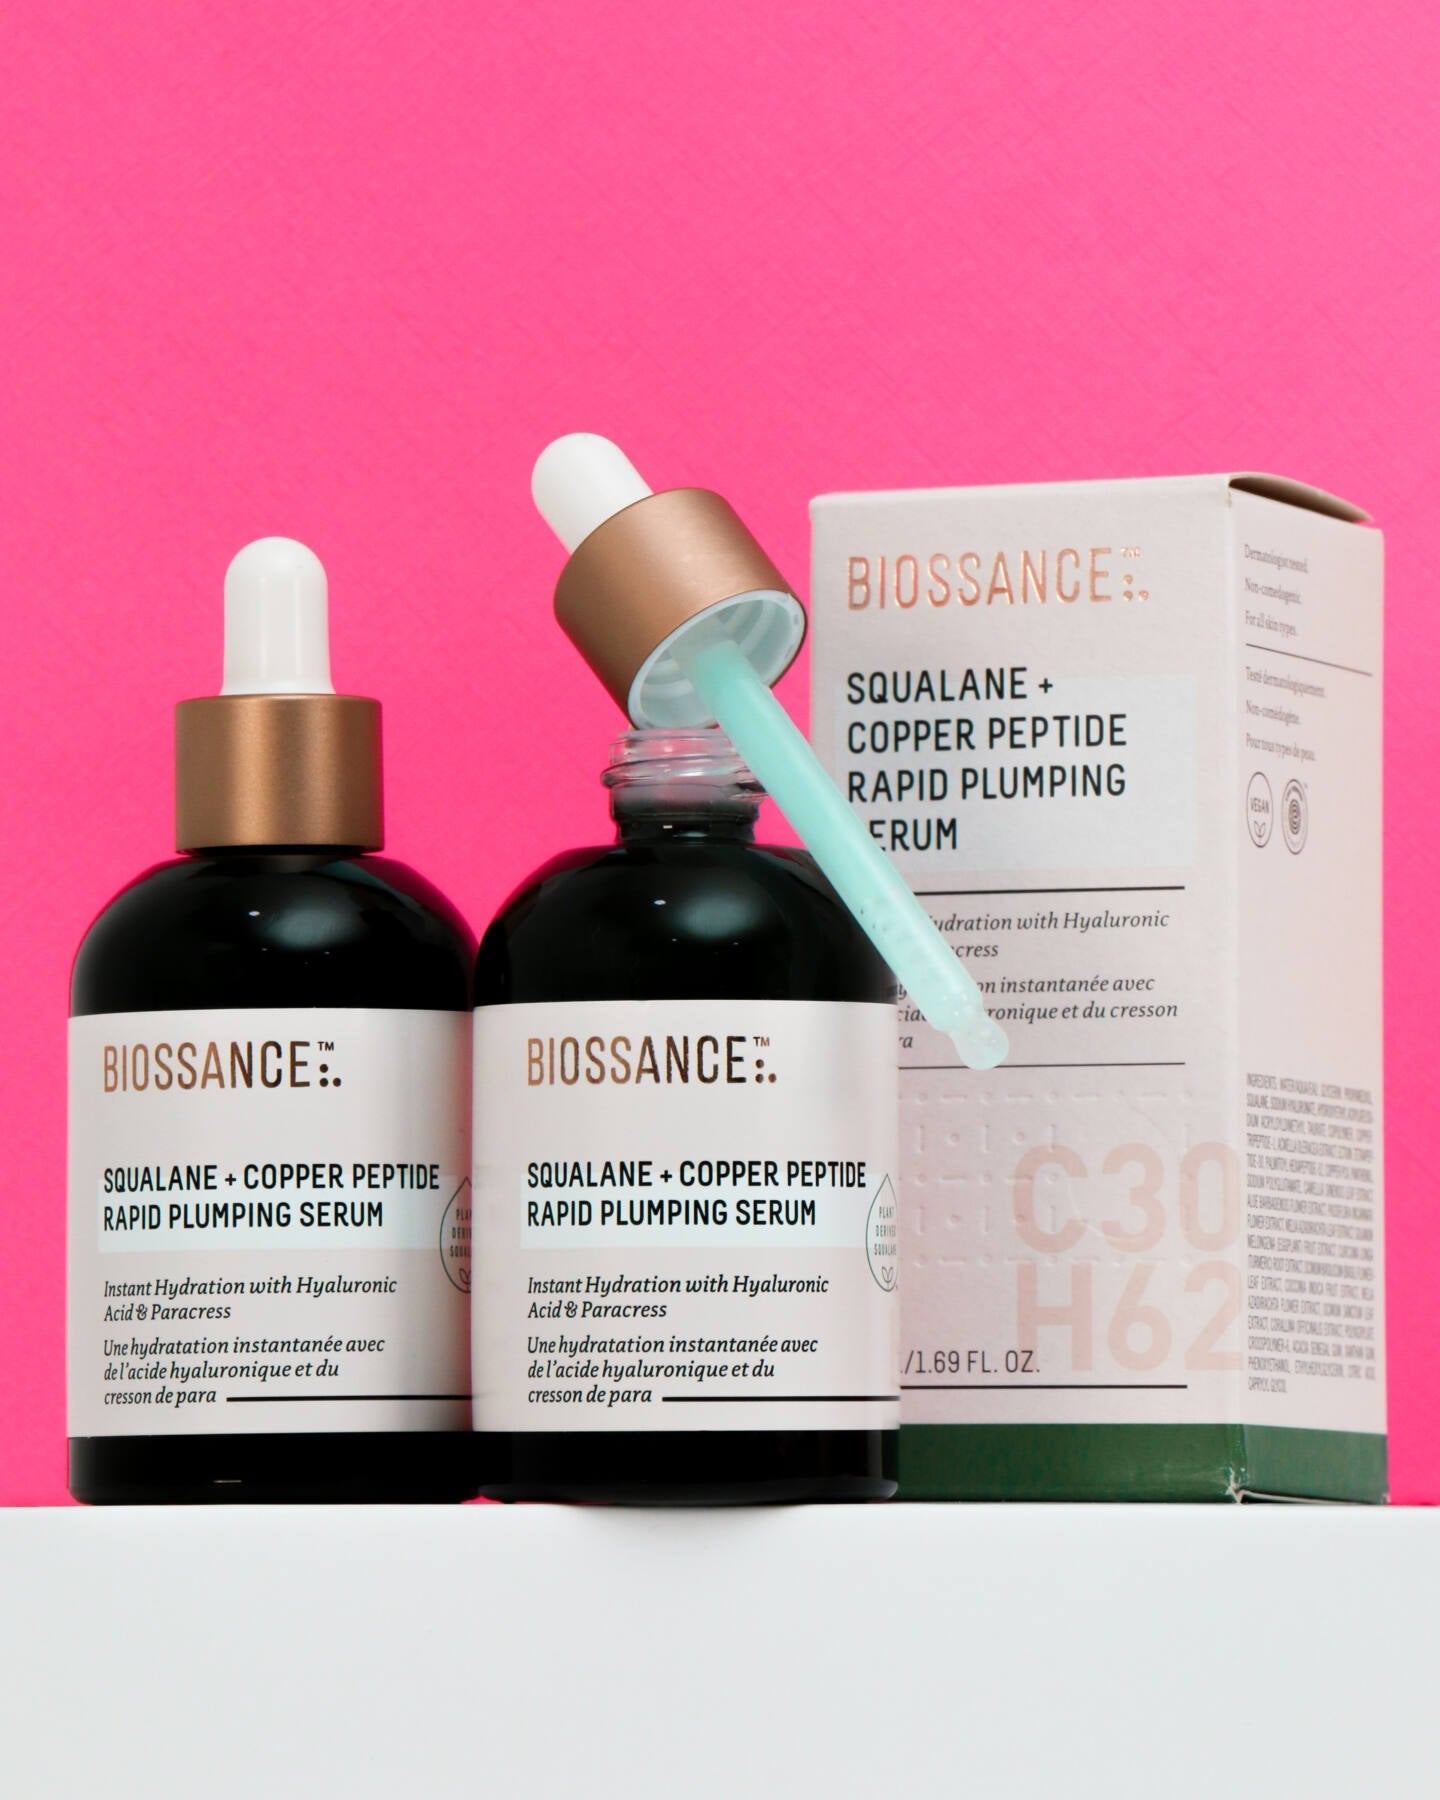 Biossance Squalane + Copper Peptide Rapid Plumping Serum and 20% Off | AD